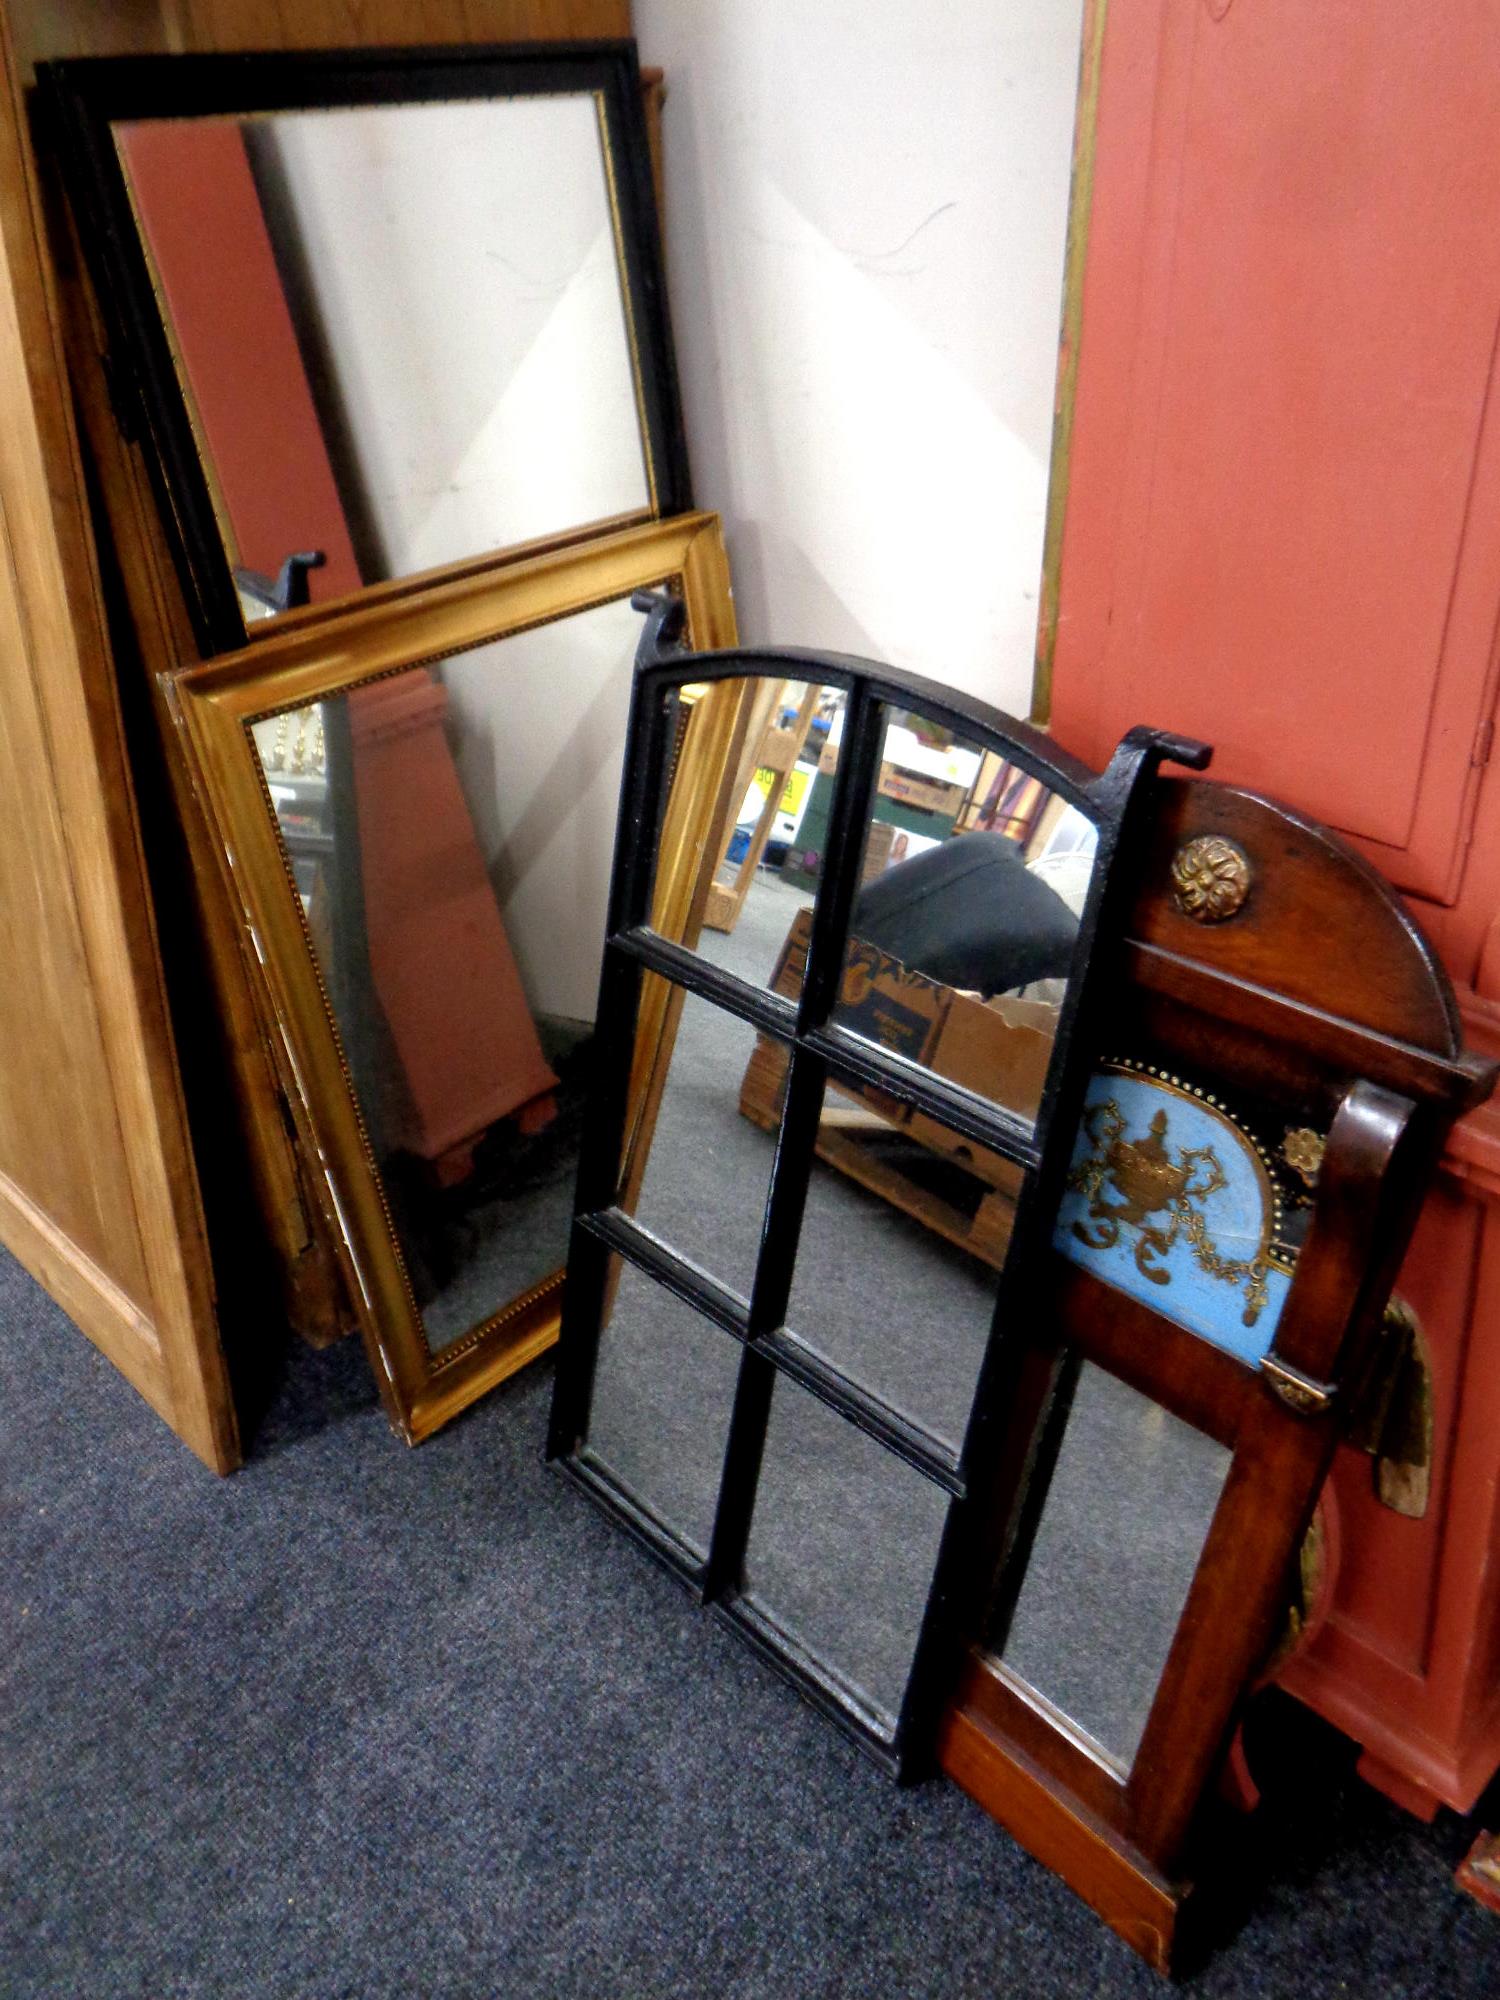 A 19th century mahogany mirror and glass panel, framed as one,